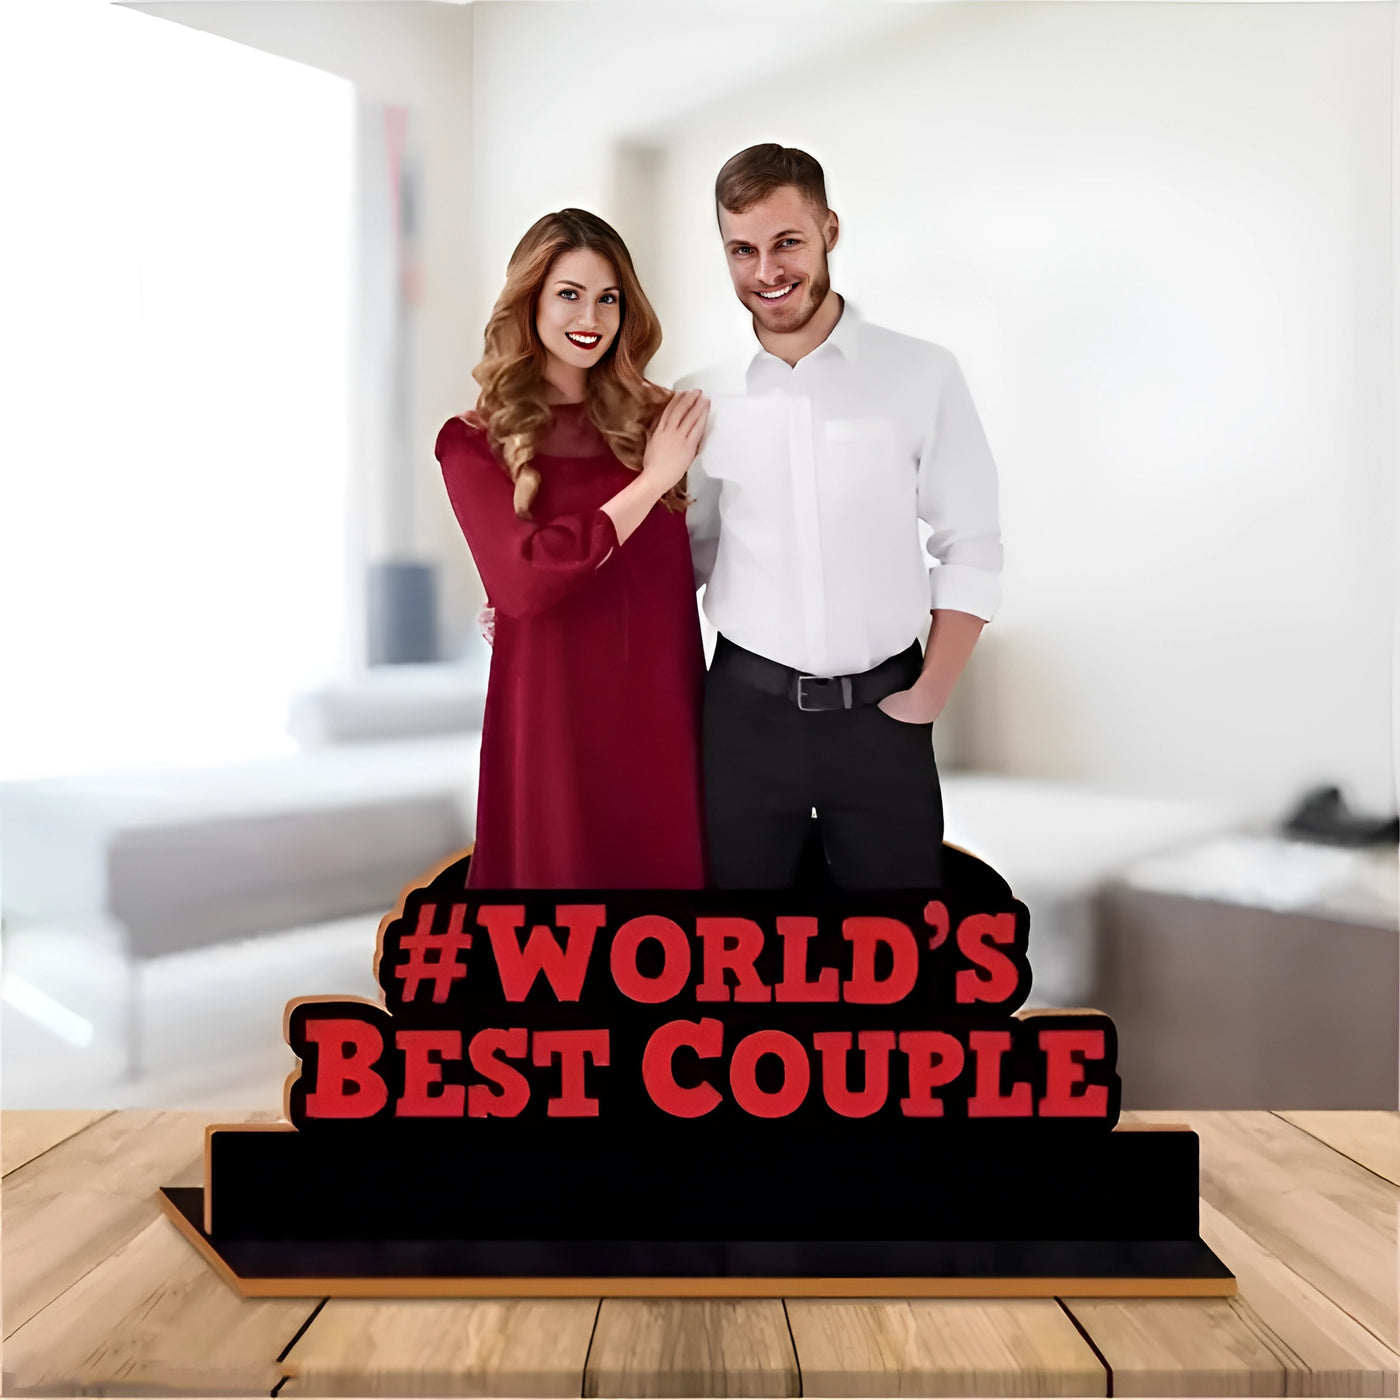 Wooden cutout photo frame best couple anniversary